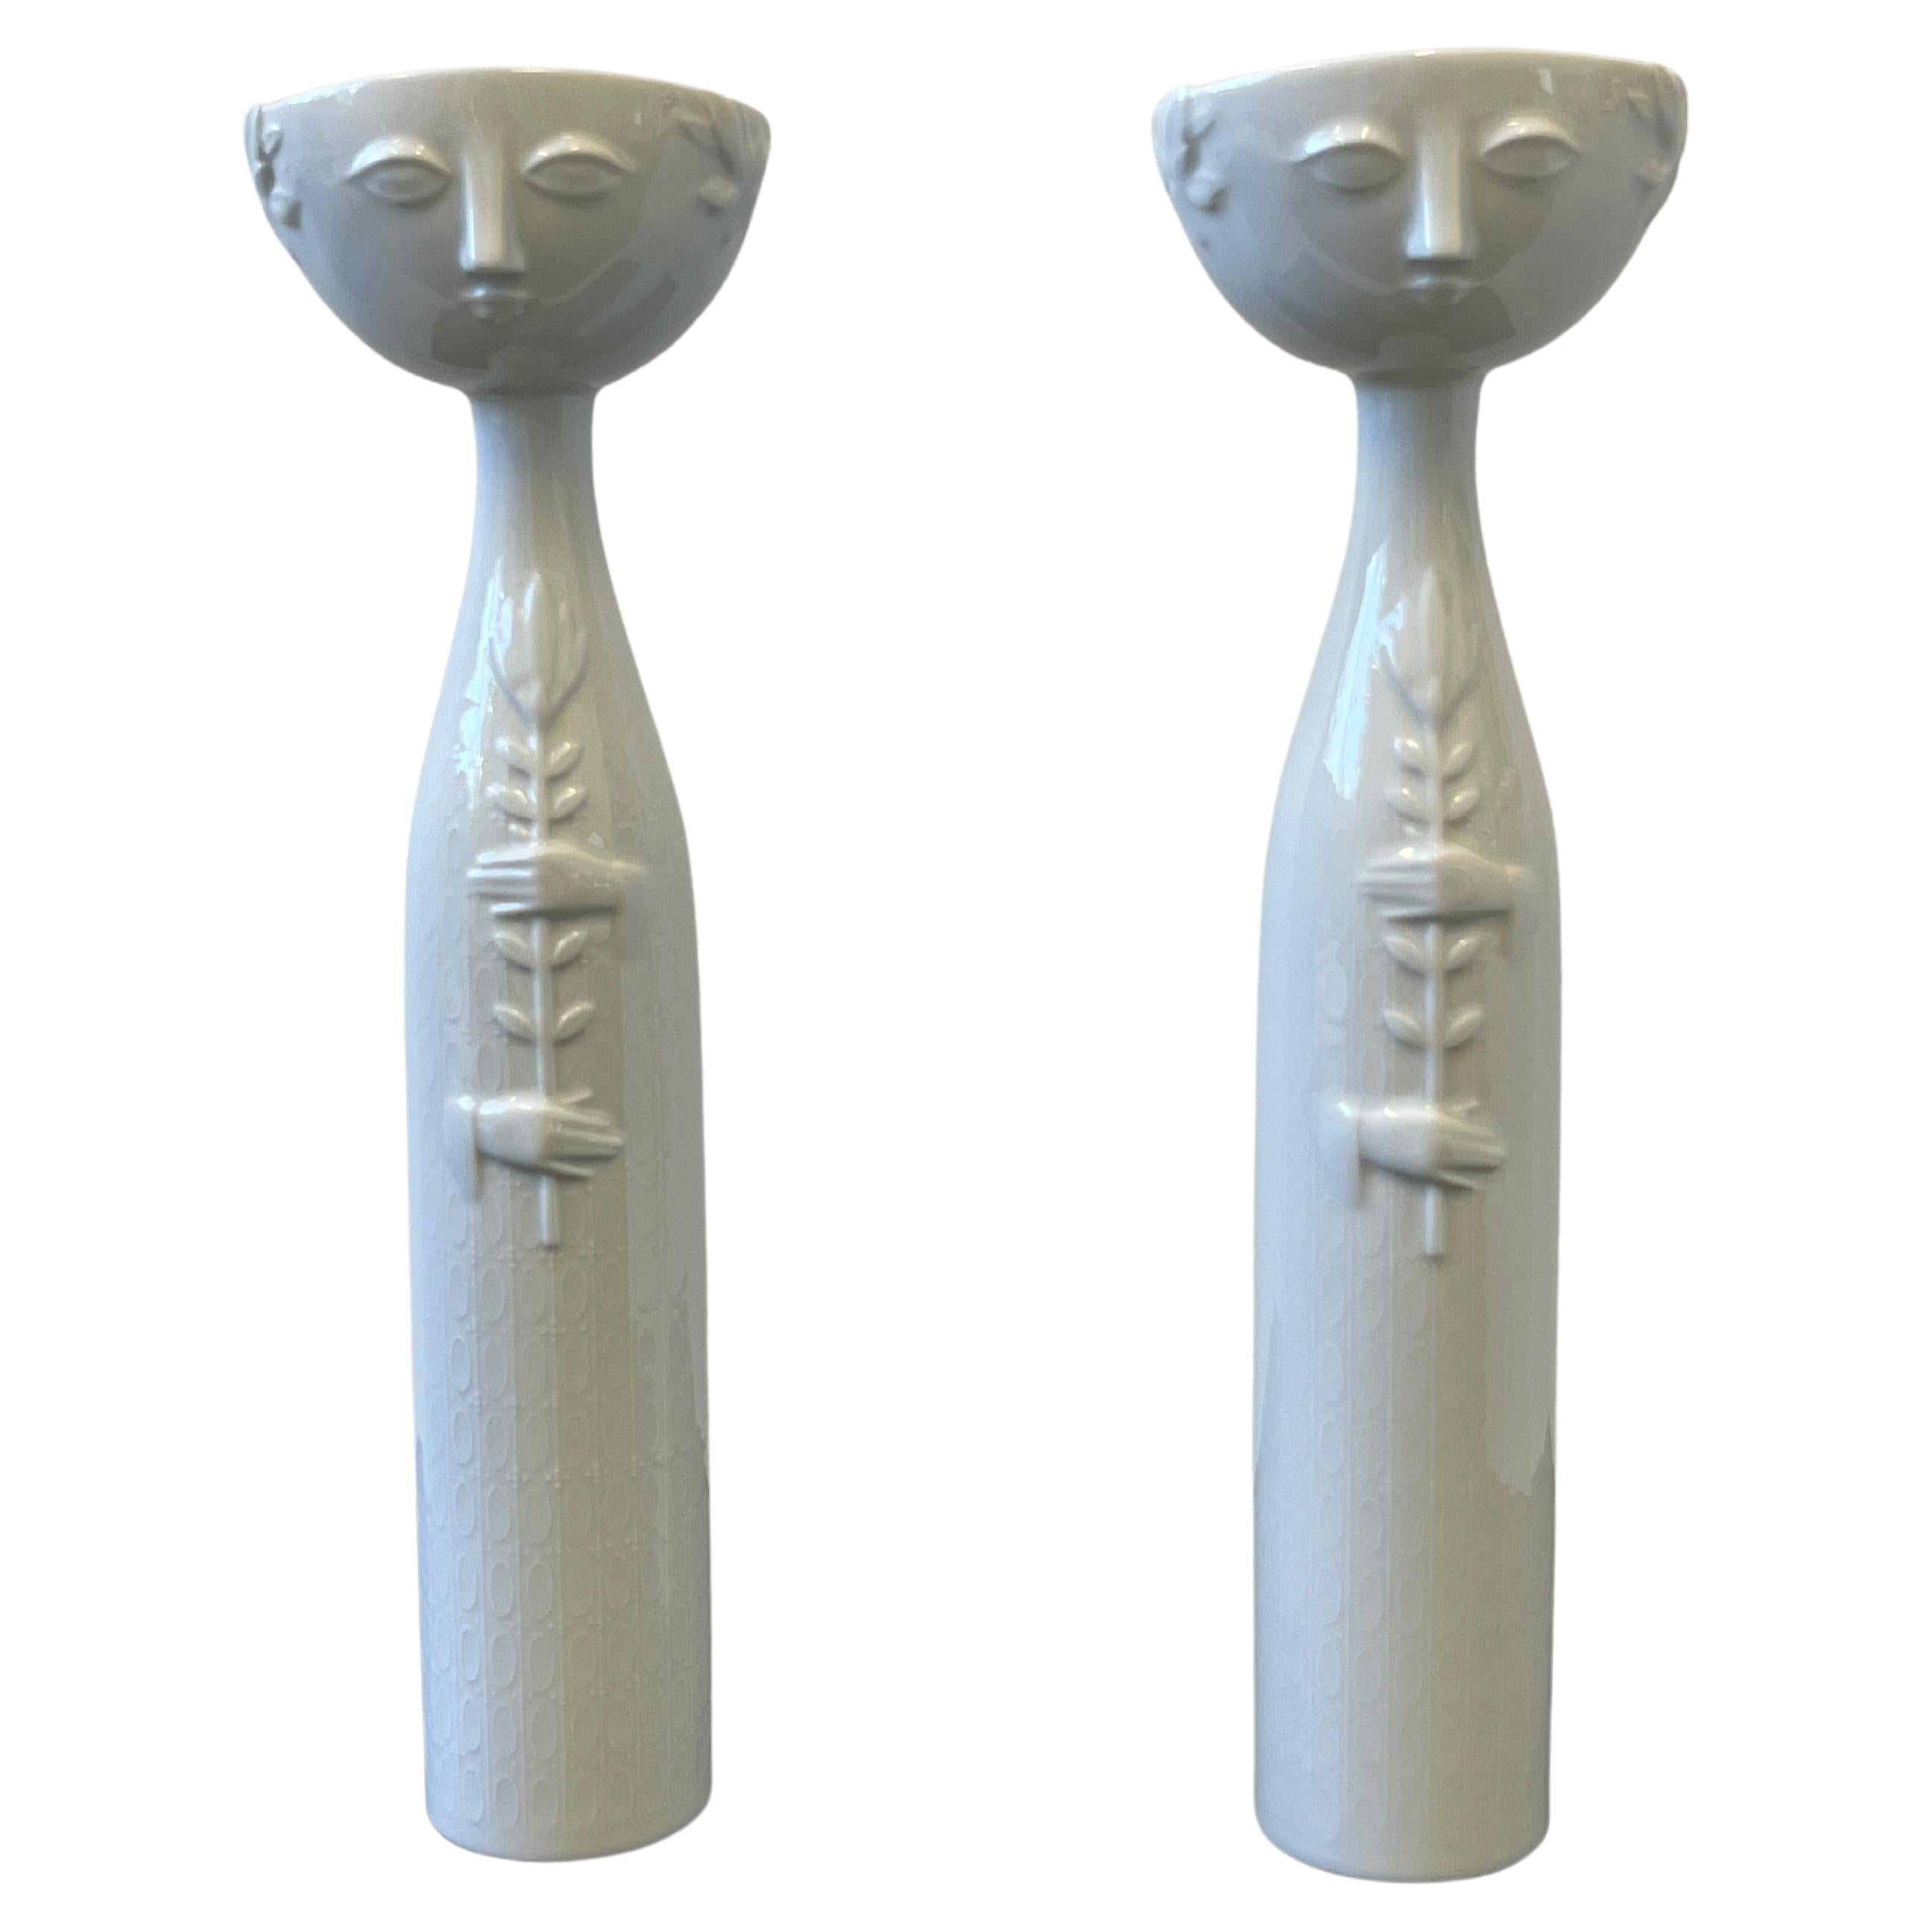 Pair of White Porcelain Eva Candle Holders by Bijorn Wiinblad for Rosenthal 